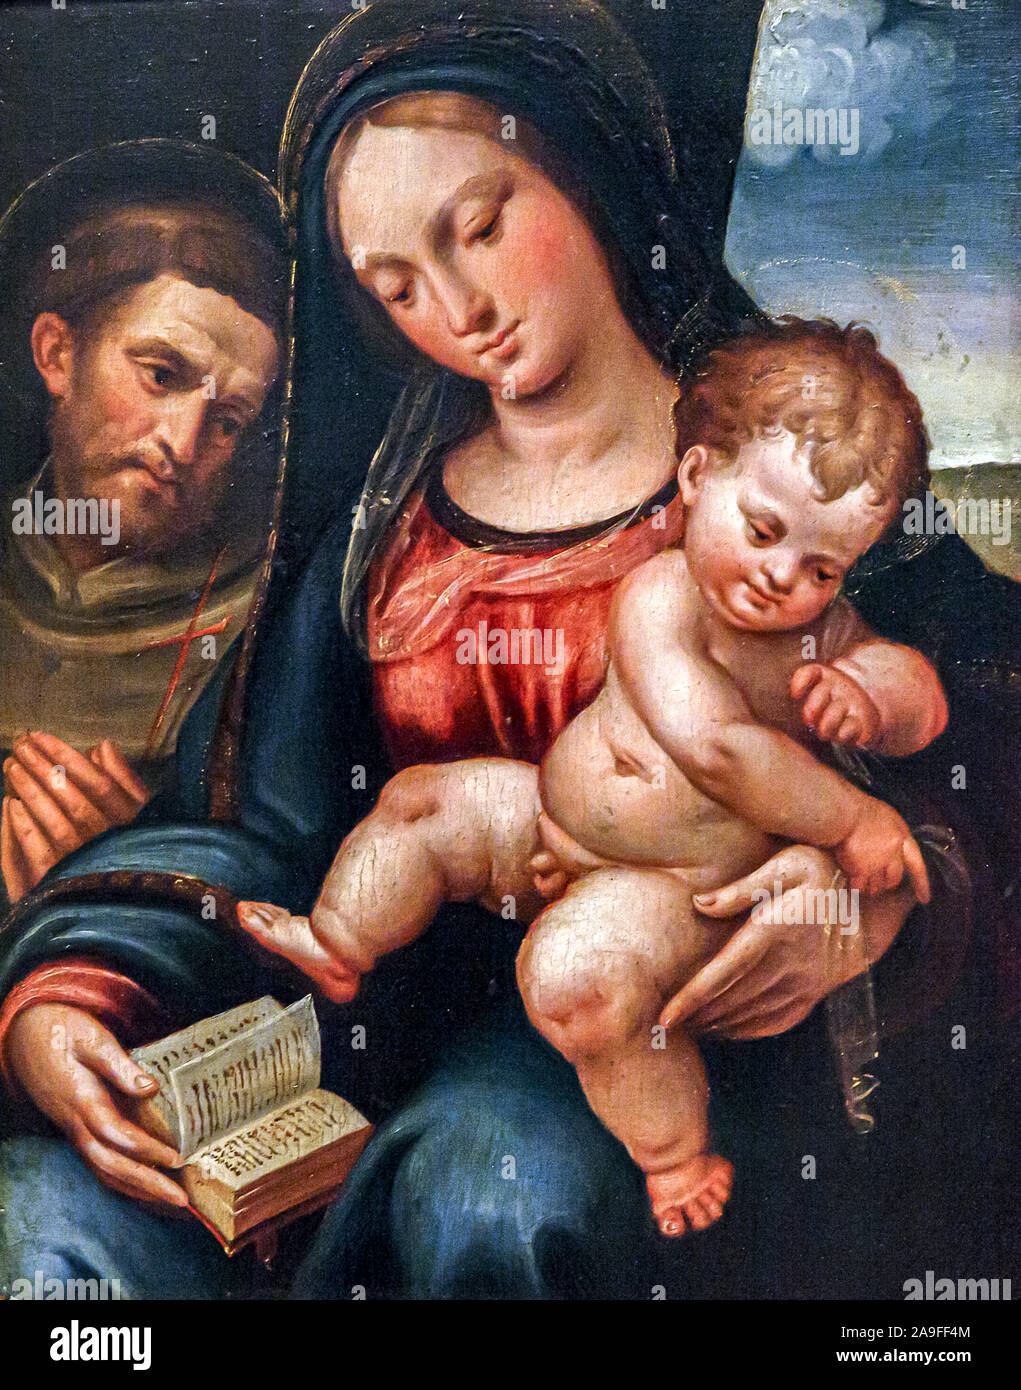 Italy Emilia Romagna Forlì - art gallery of the San Domenico museums - the Madonna with the child and San Francesco: Bartolomeo Ramenghi known as il Bagnacavallo - 15th century Stock Photo